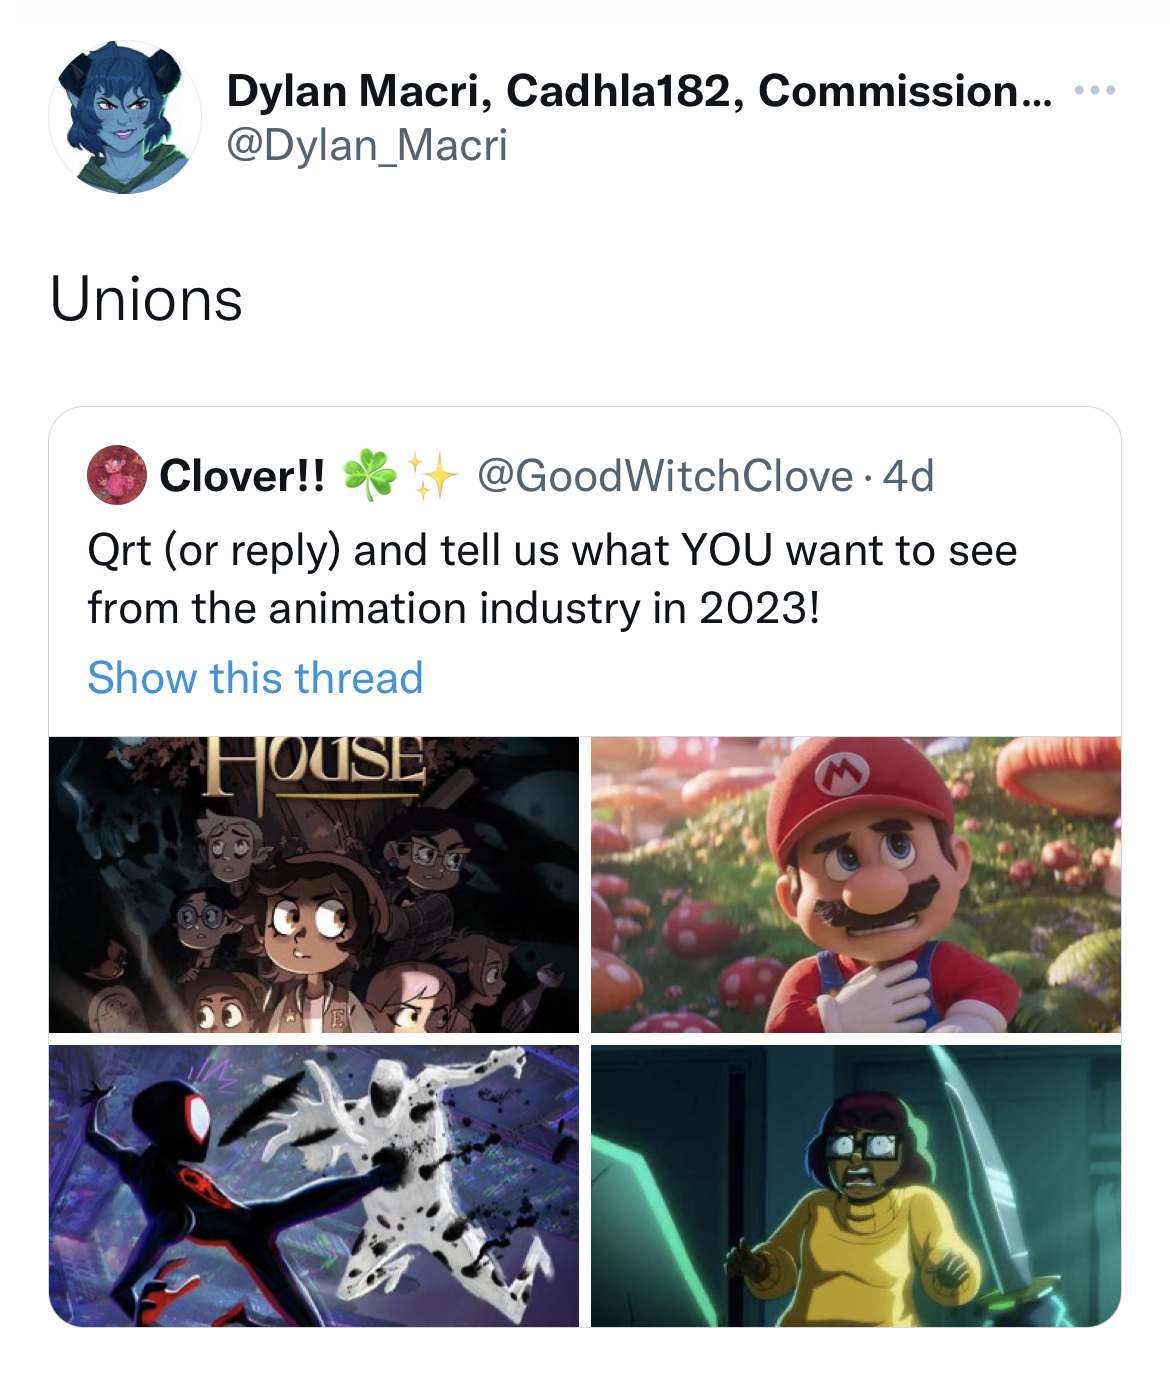 cartoon - Dylan Macri, Cadhla182, Commission... Unions Clover!! WitchClove4d Qrt or and tell us what You want to see from the animation industry in 2023! Show this thread House